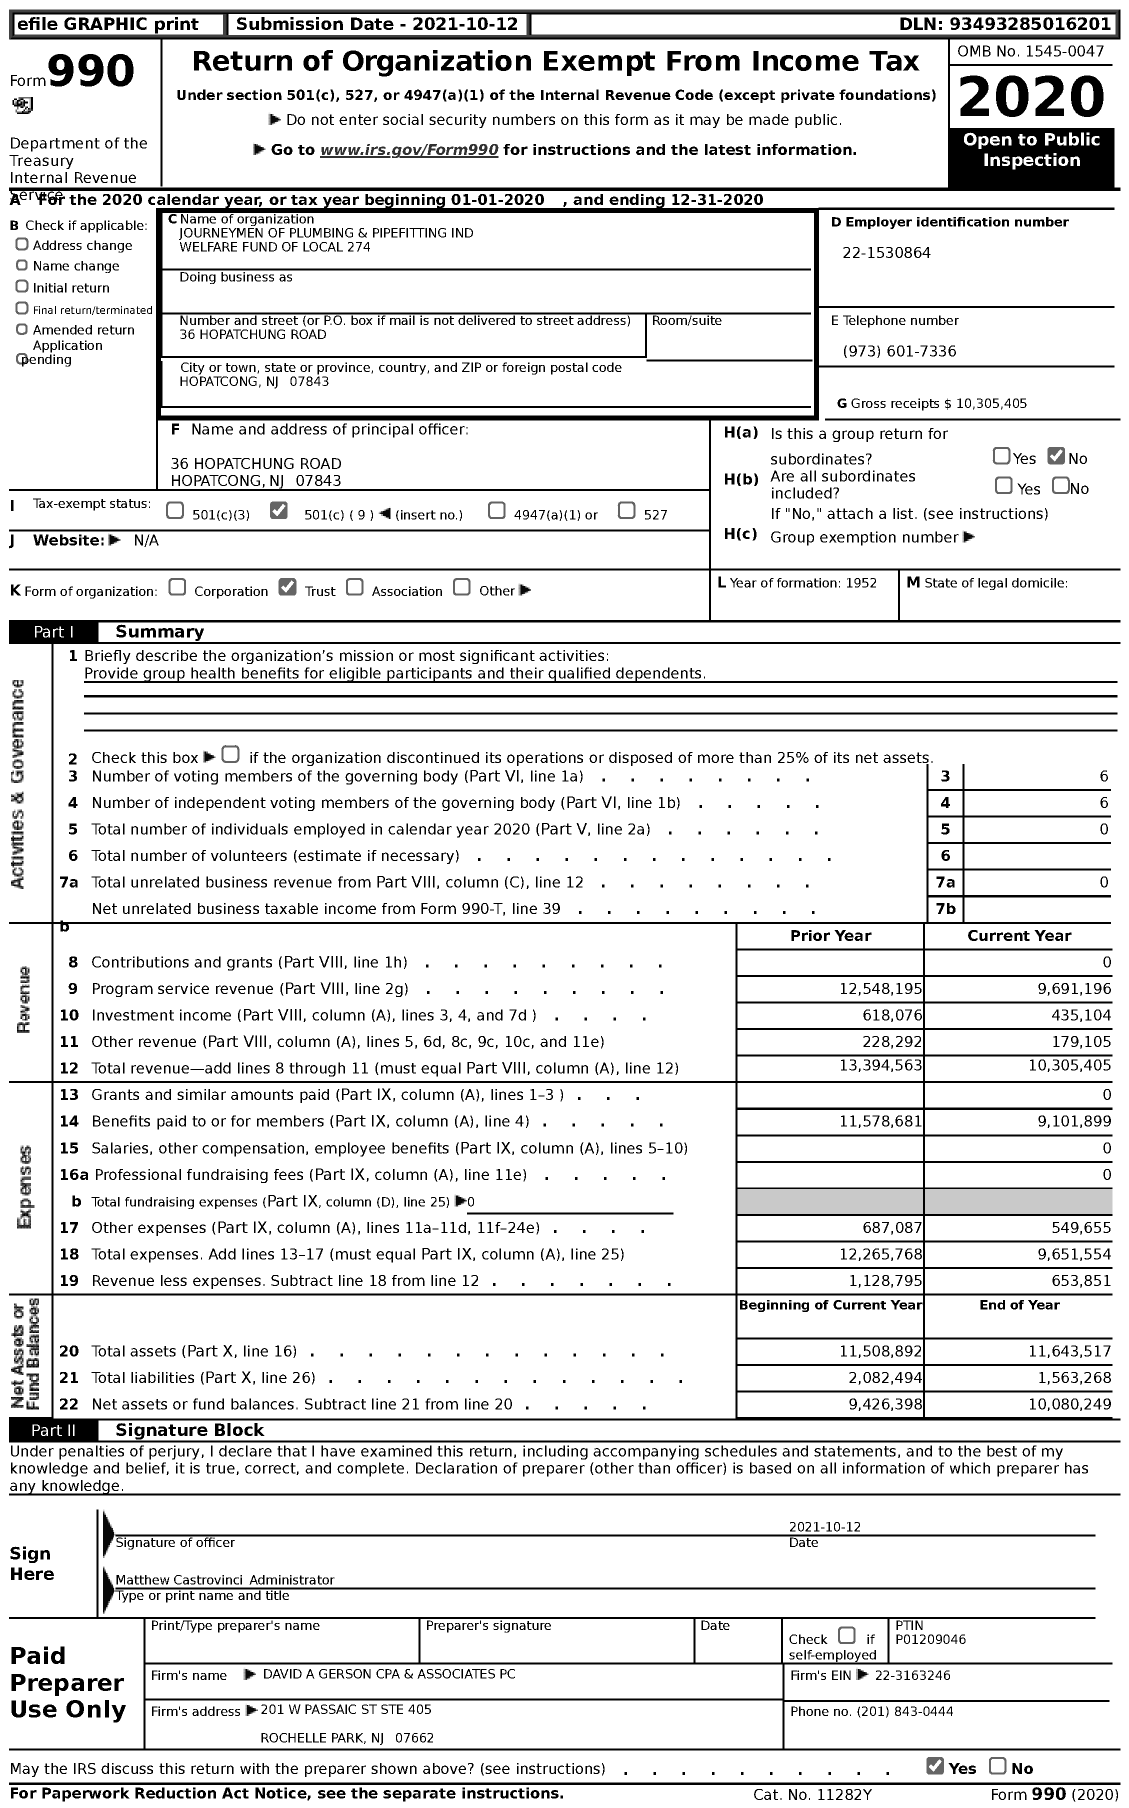 Image of first page of 2020 Form 990 for Journeymen of Plumbing and Pipefitting Ind Welfare Fund of Local 274